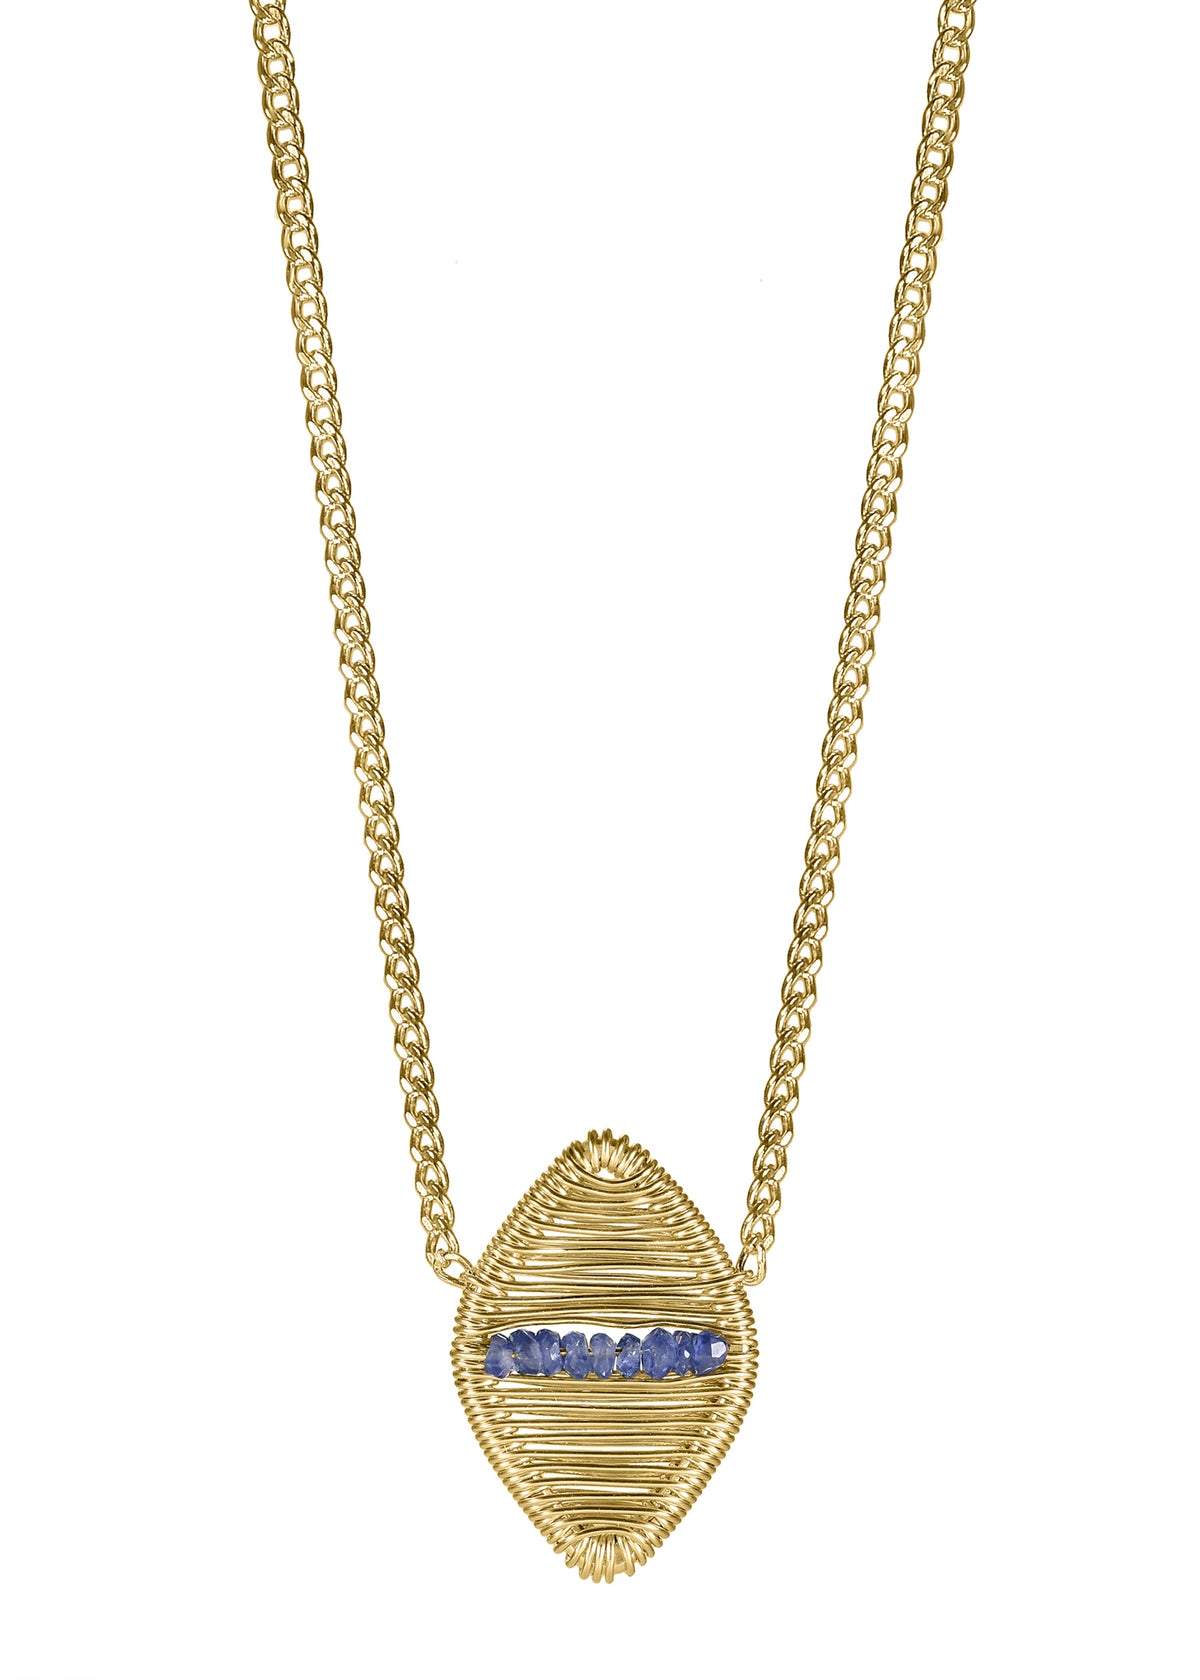 Blue sapphire 14k gold fill Necklace measures 16&quot; in length Pendant measures 5/8&quot; in length and 3/8&quot; in width at the widest point Handmade in our Los Angeles studio